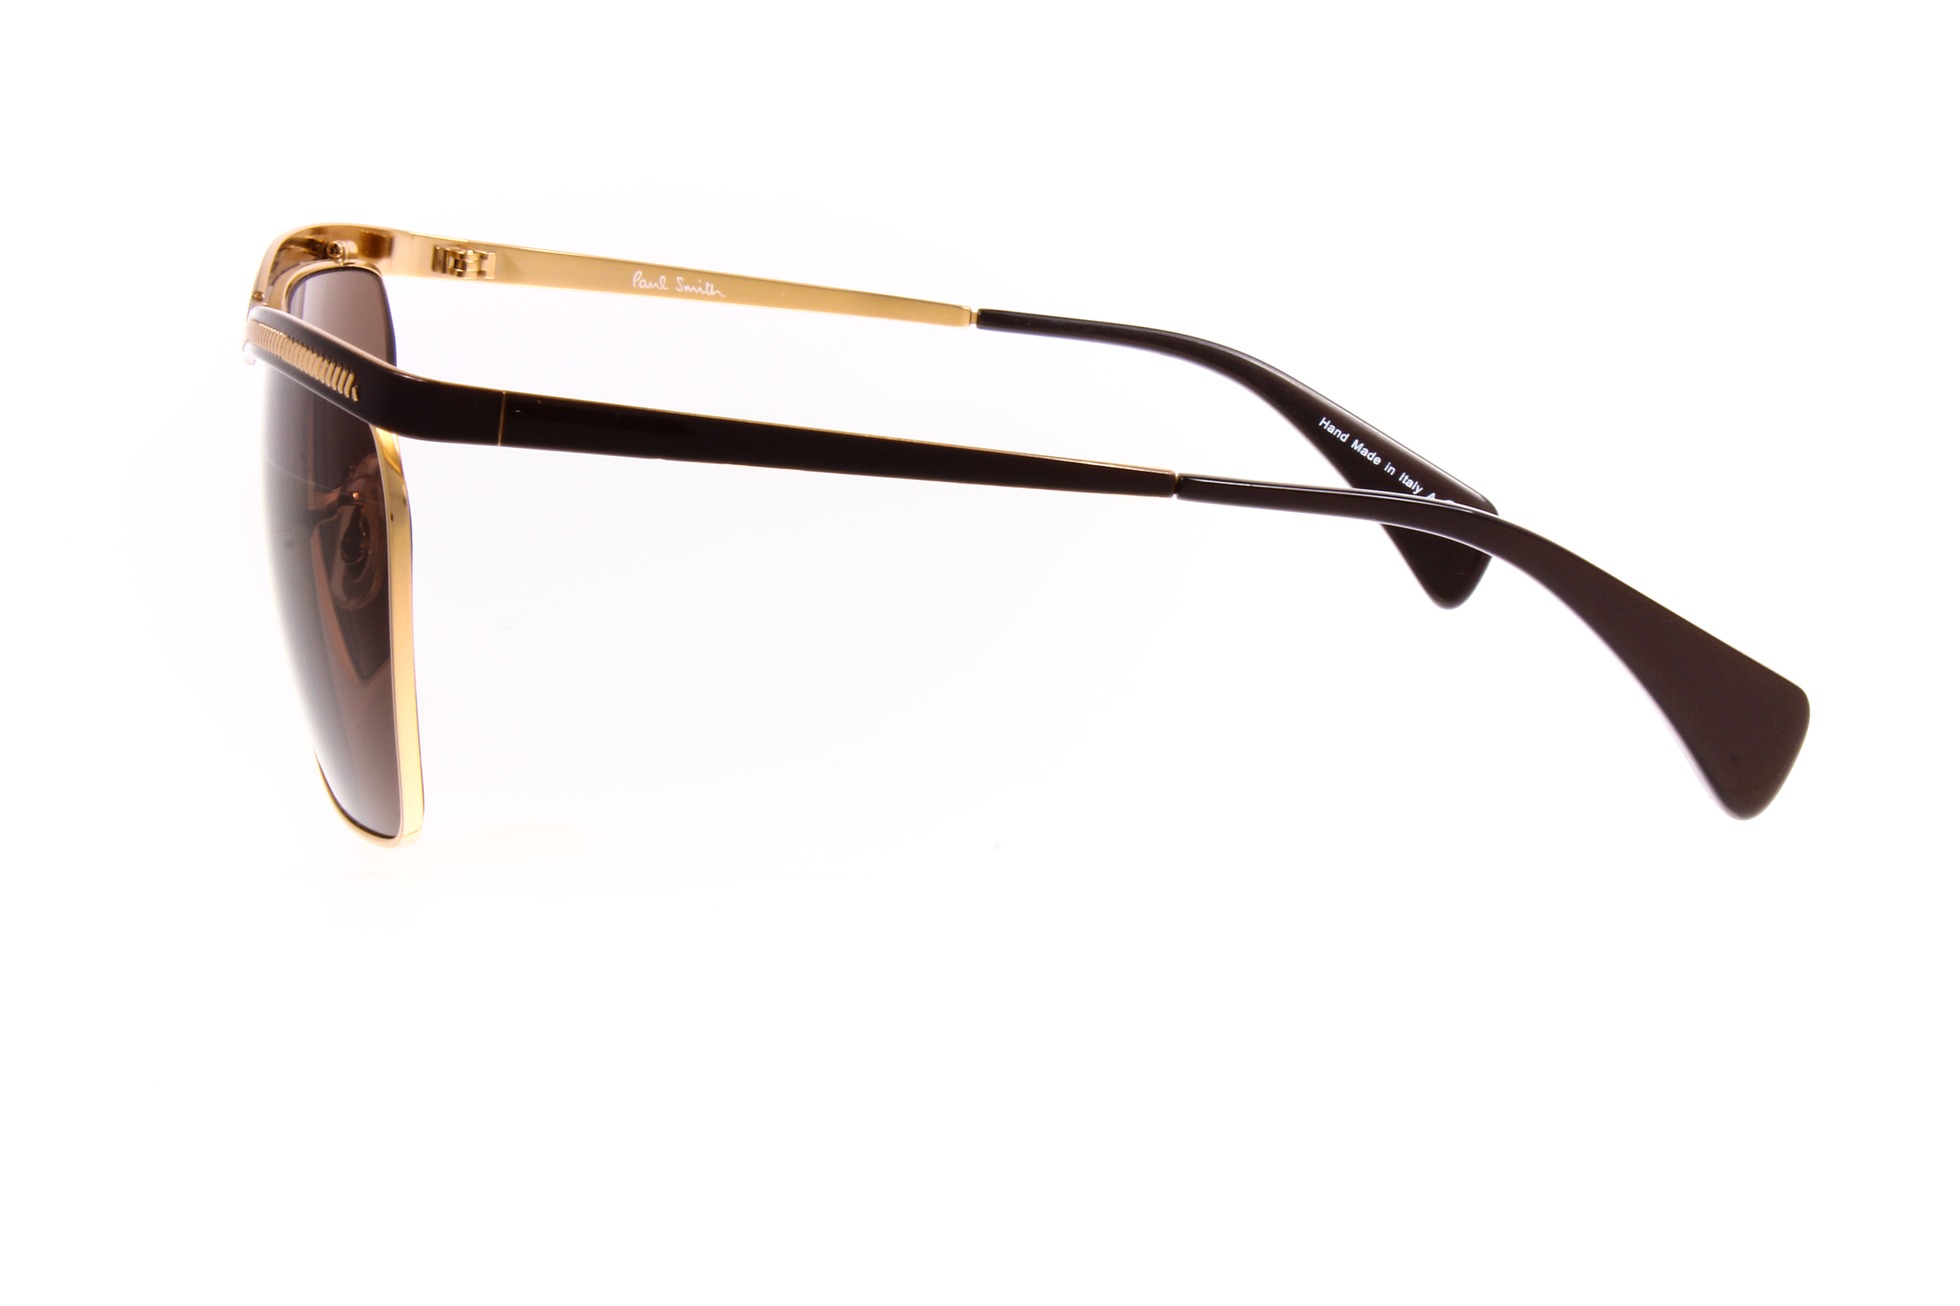 Paul Smith PM4053-S 5098/73FOXLEY